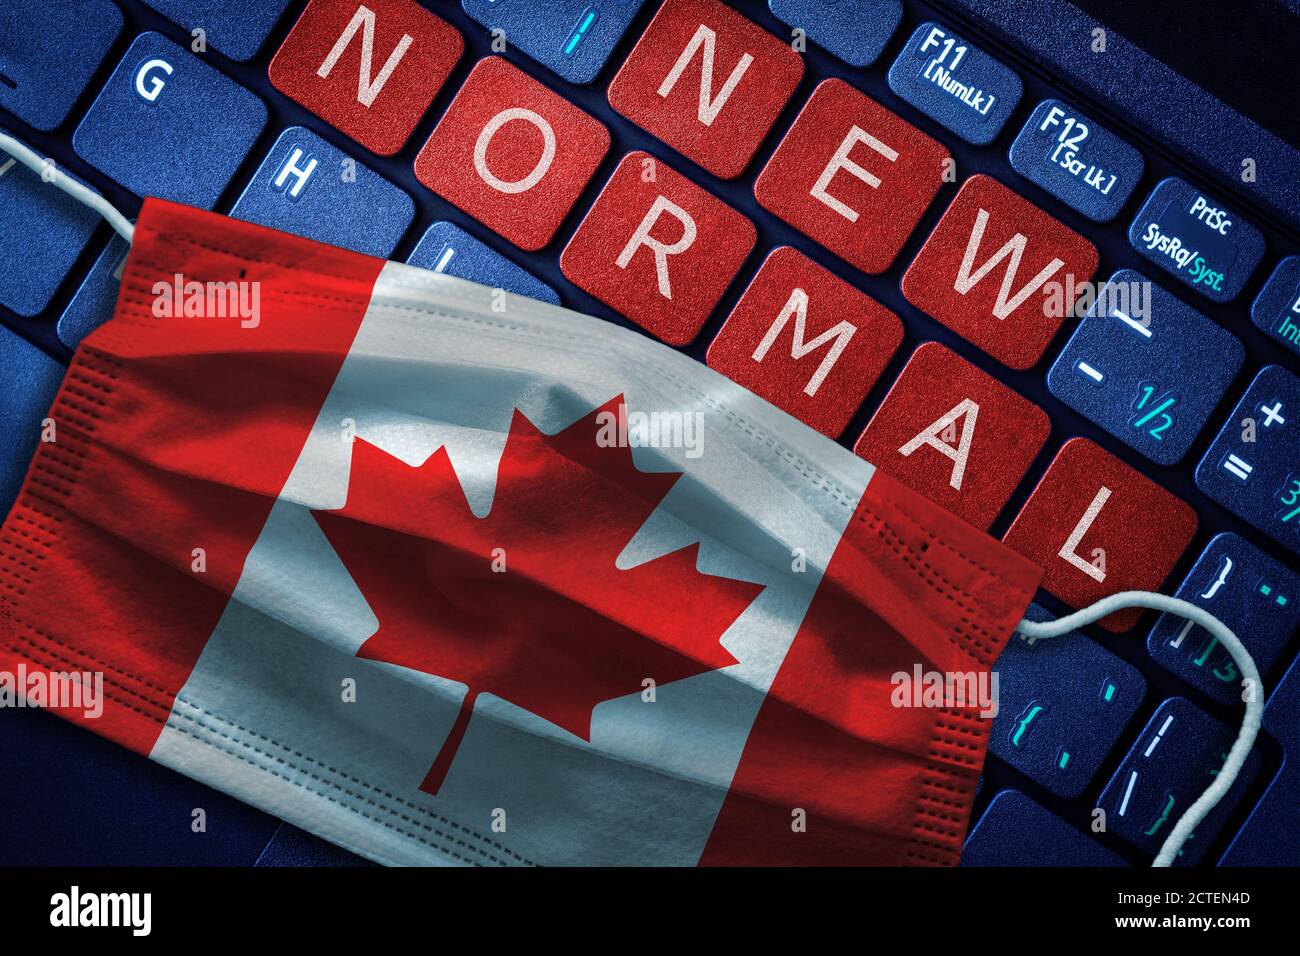 COVID-19 coronavirus new normal concept in Canada as shown by Canadian flag on face mask with New Normal on laptop red alert keyboard buttons. Stock Photo